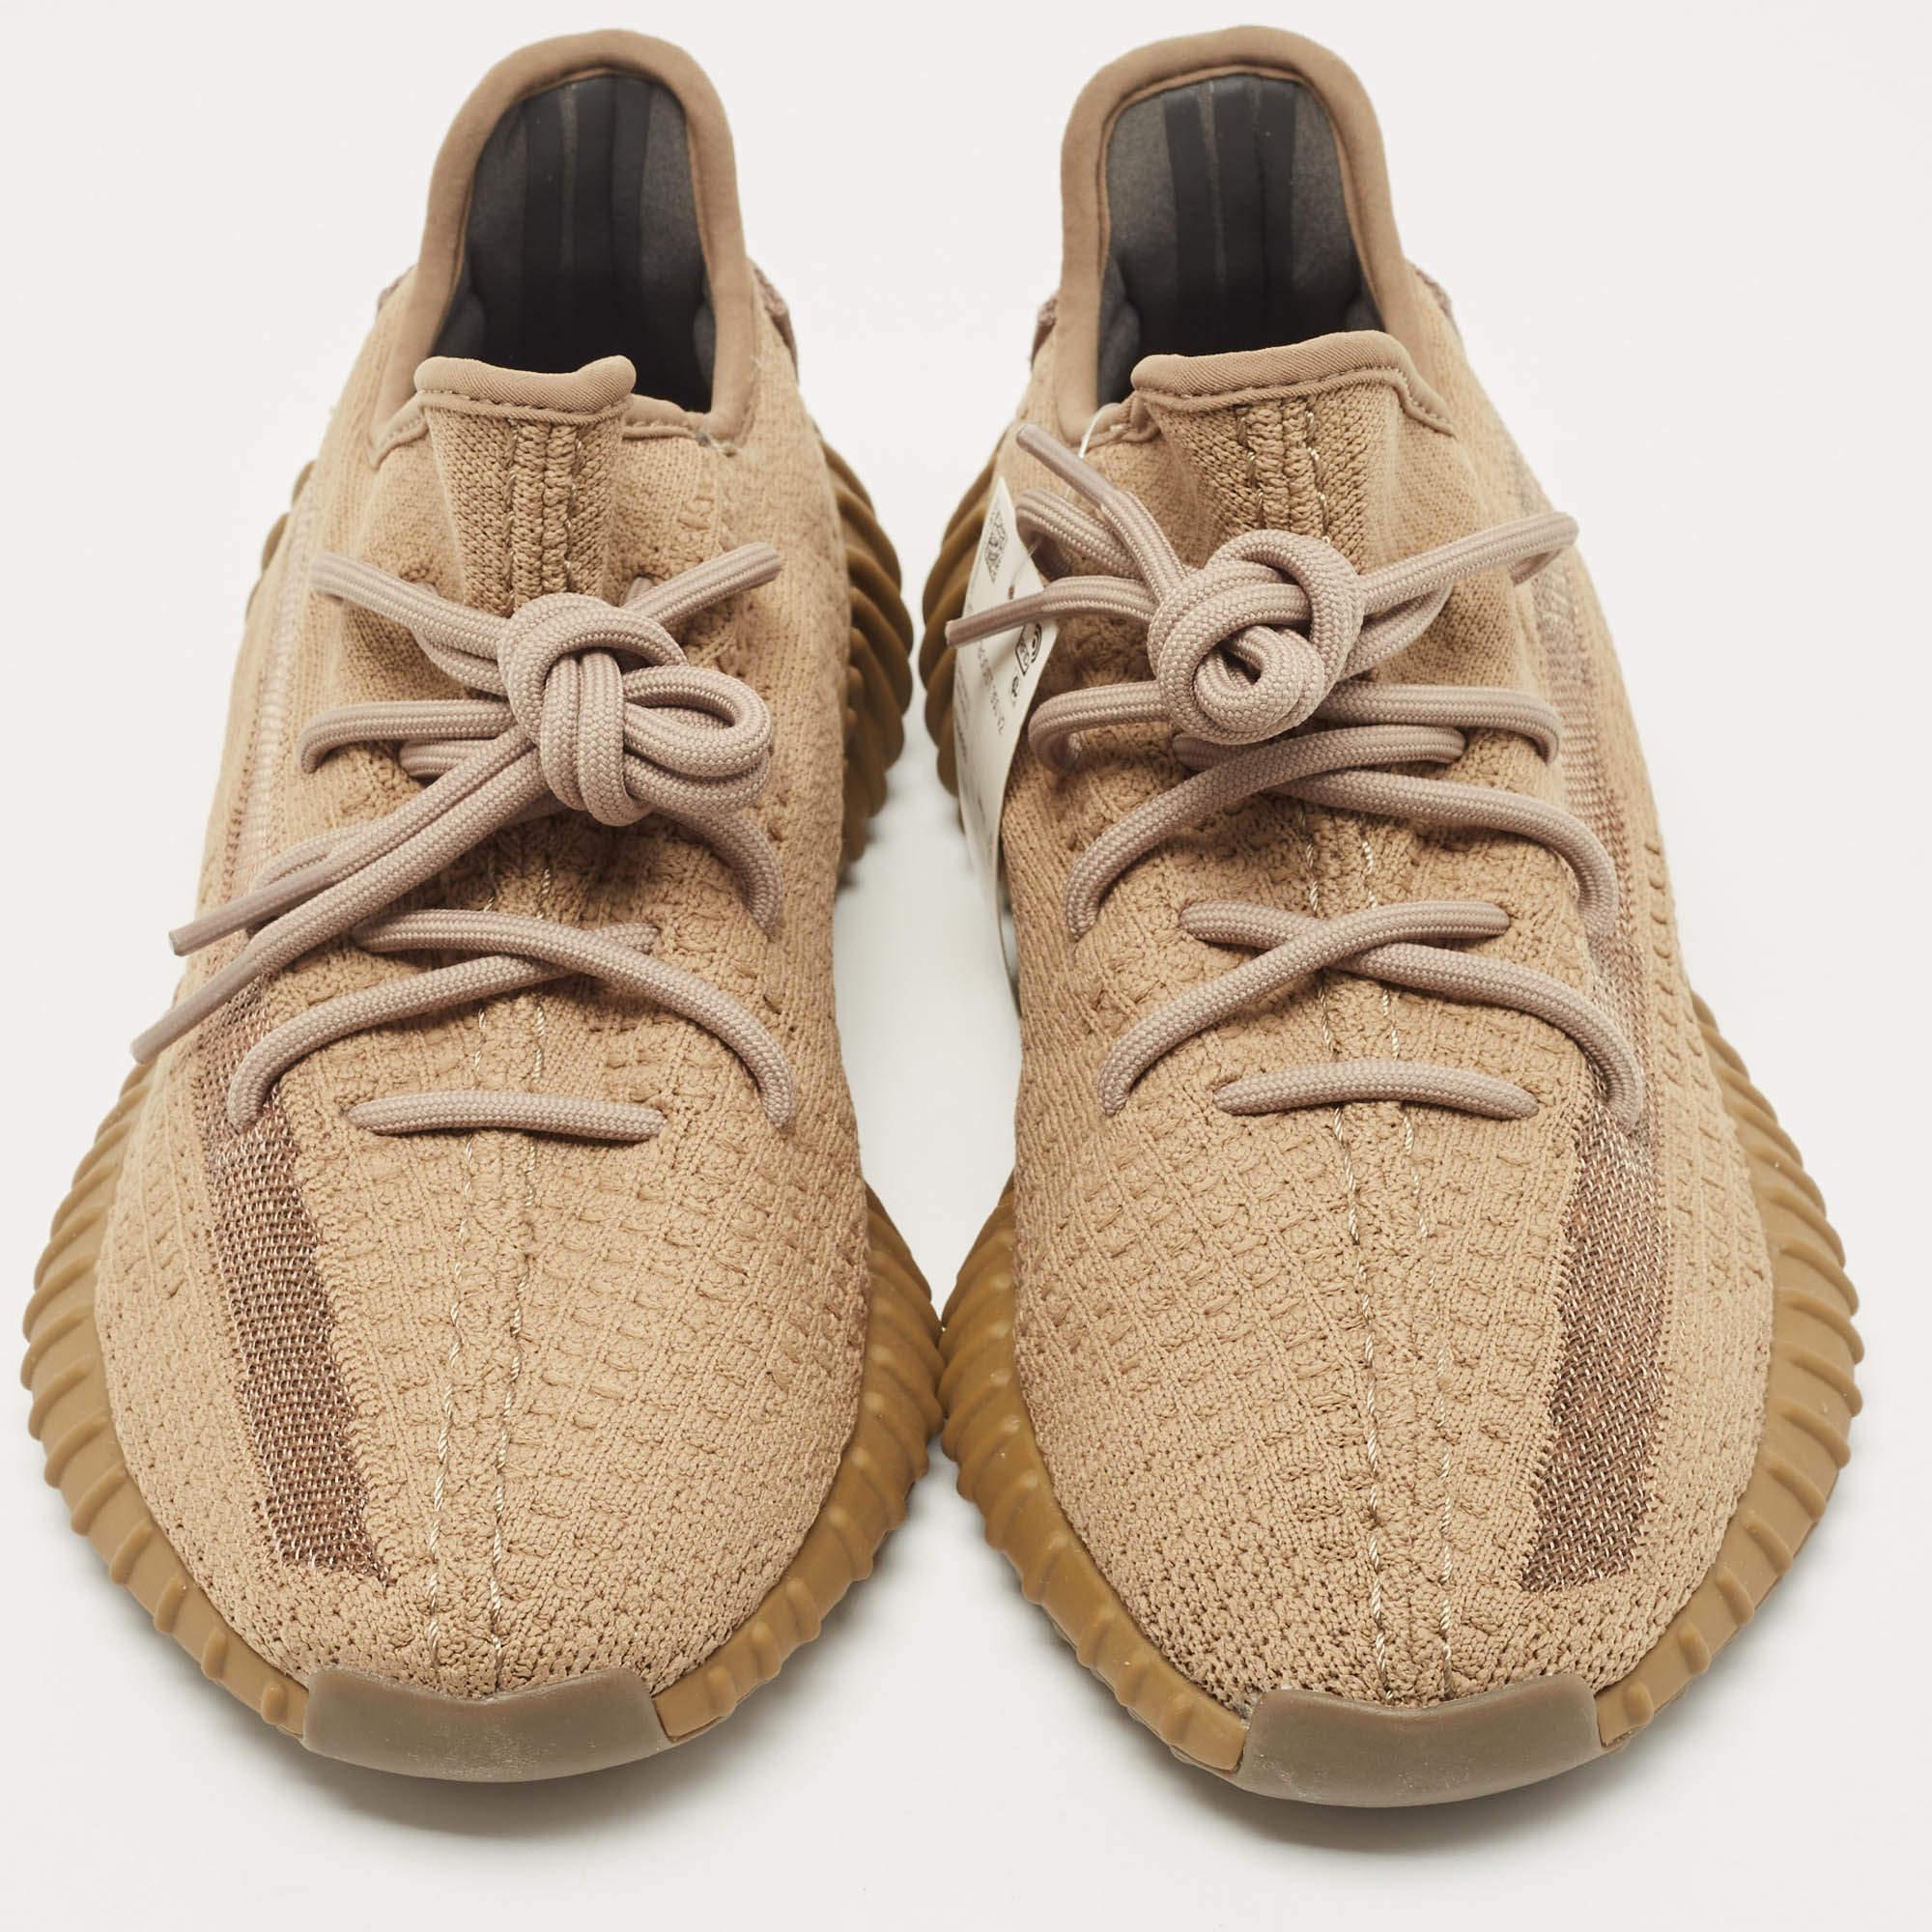 The Yeezy x Adidas Boost 350 V2 Earth sneakers are stylish and comfortable footwear. They feature a blend of brown mesh and fabric in their construction, with signature Boost technology for exceptional cushioning. The design showcases the brand's